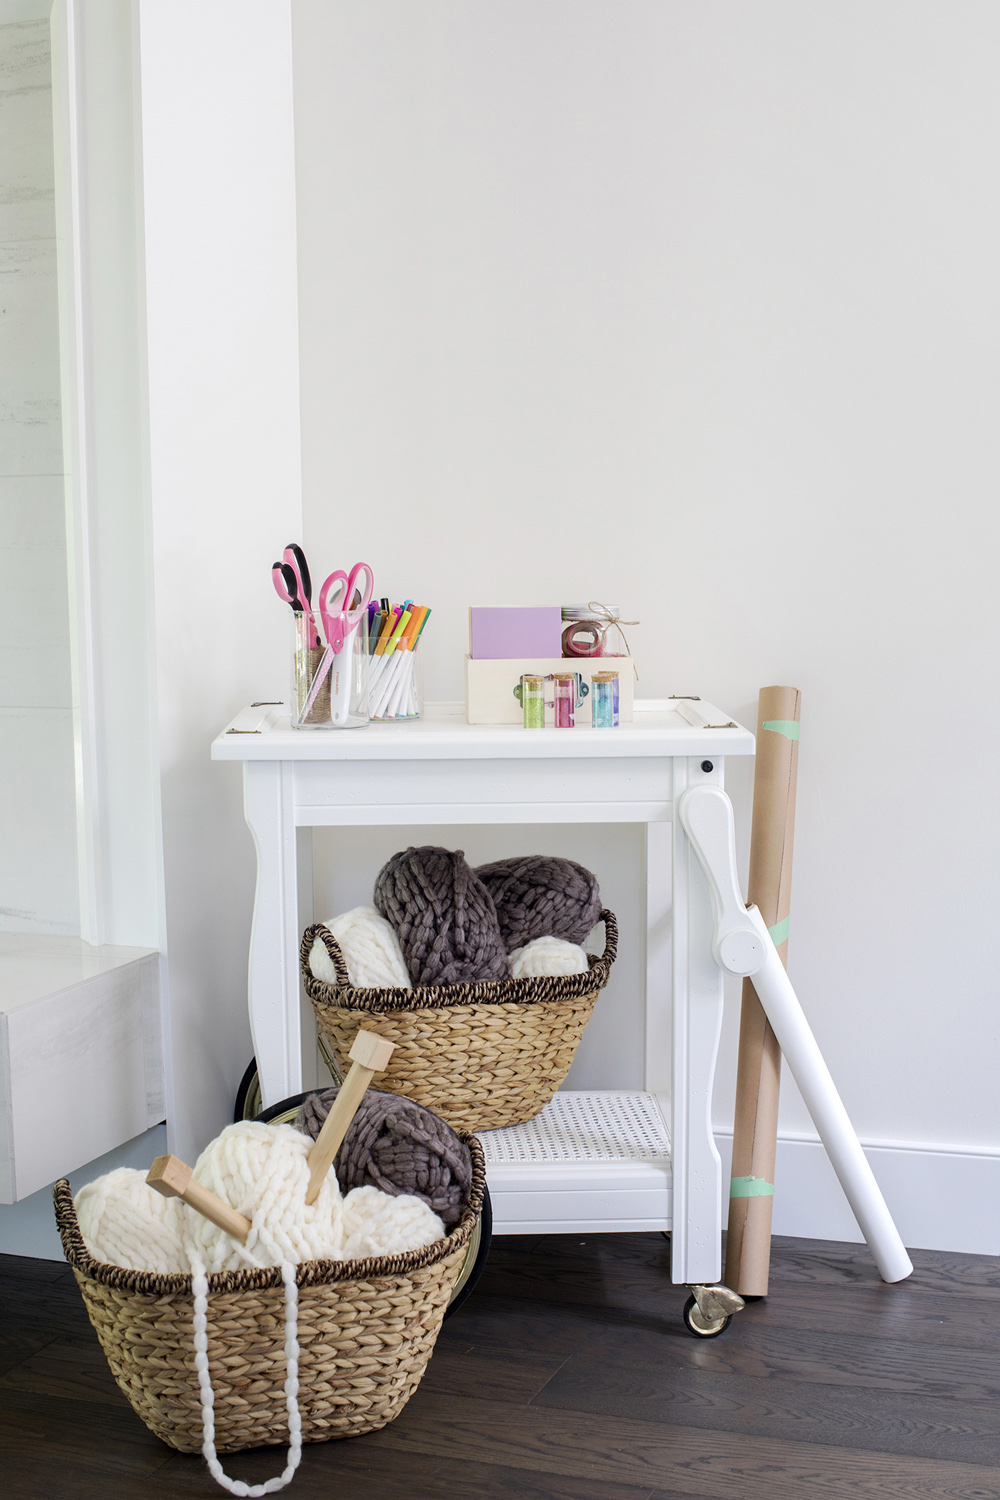 A corner with a basket of knitting needles and yarn